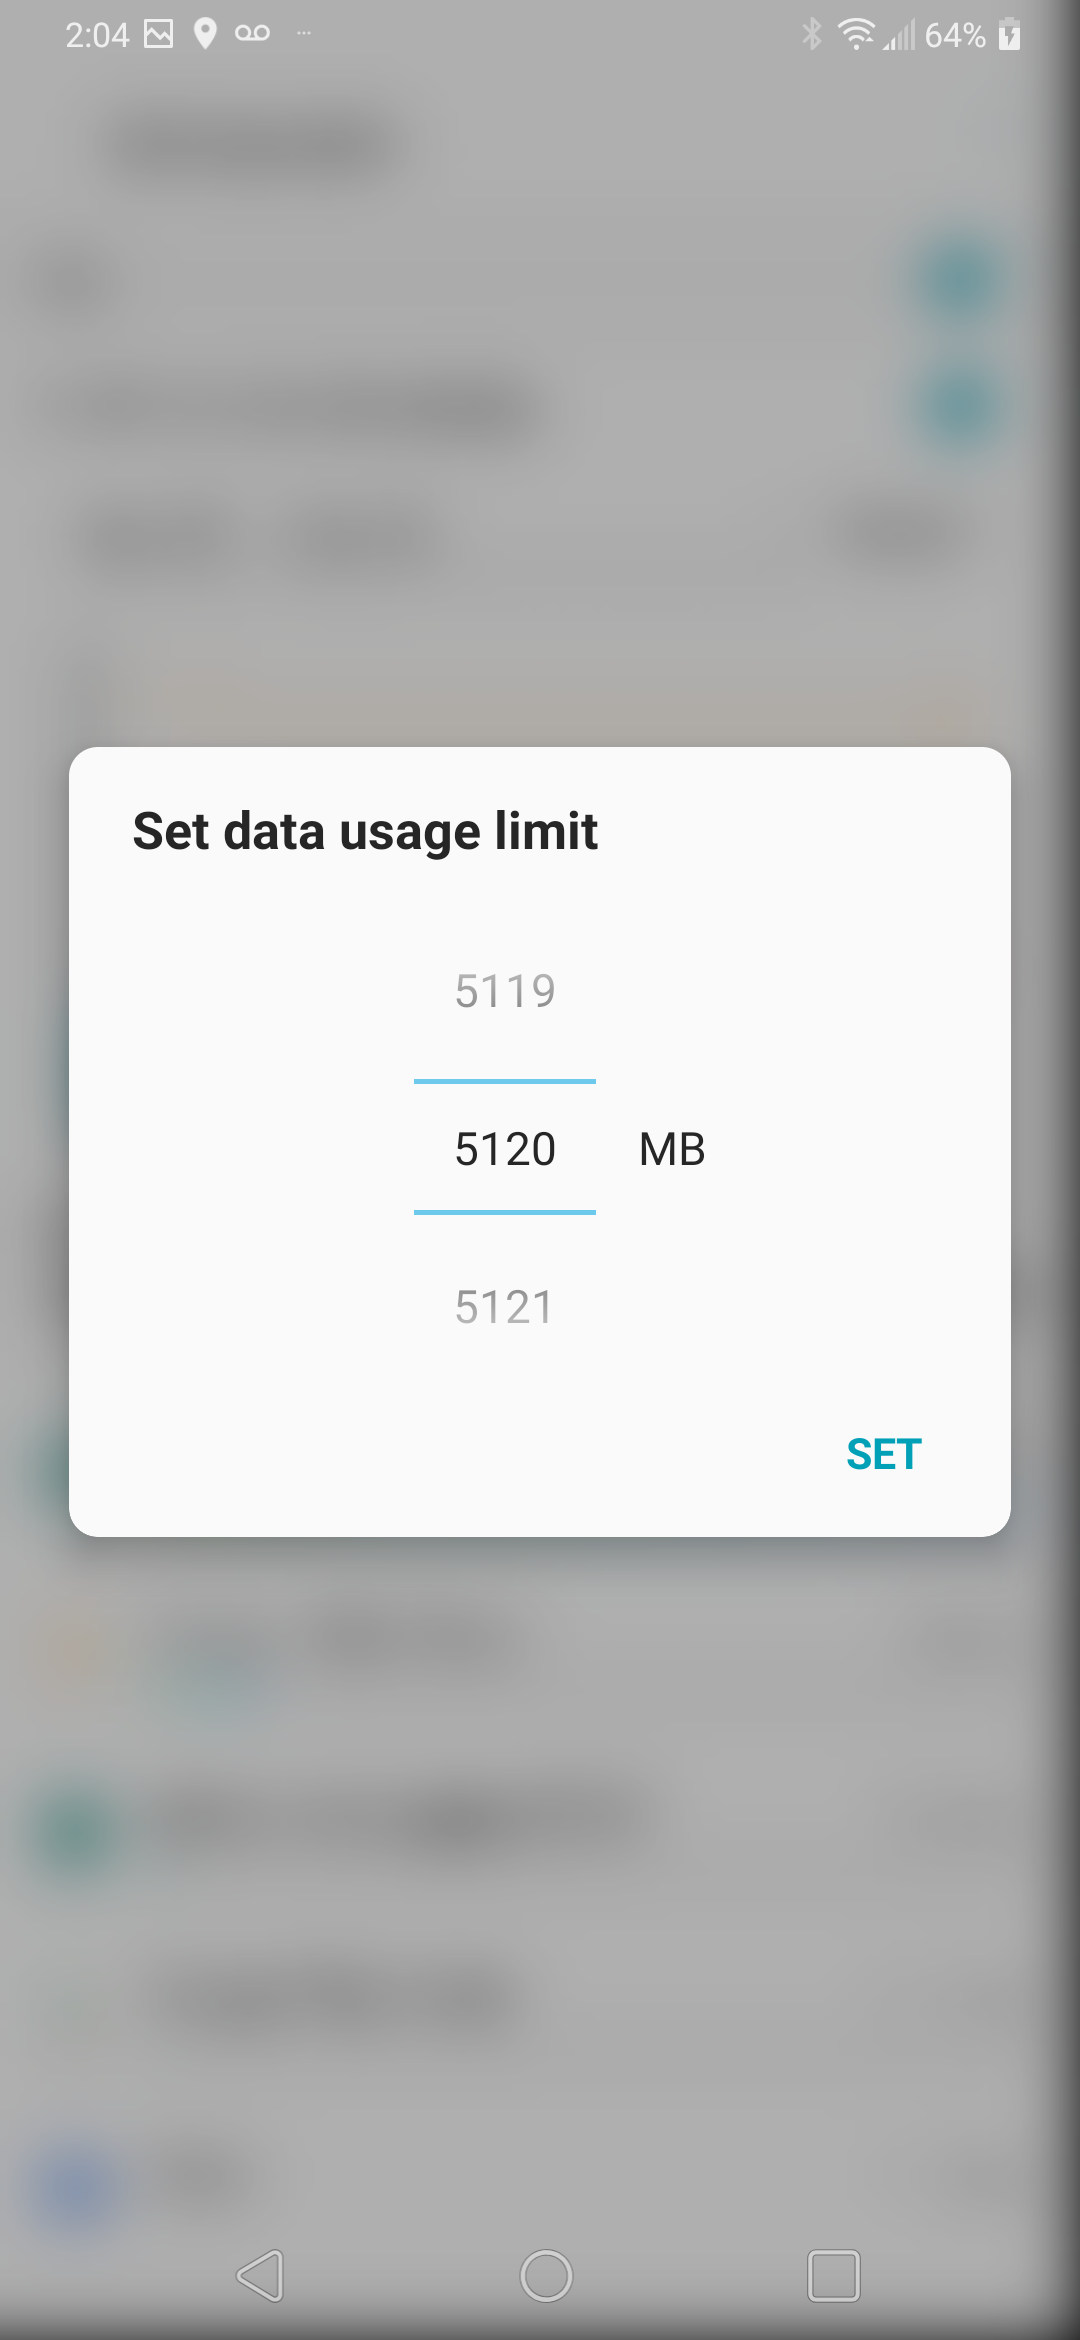 Scroll to the desired data usage limit.